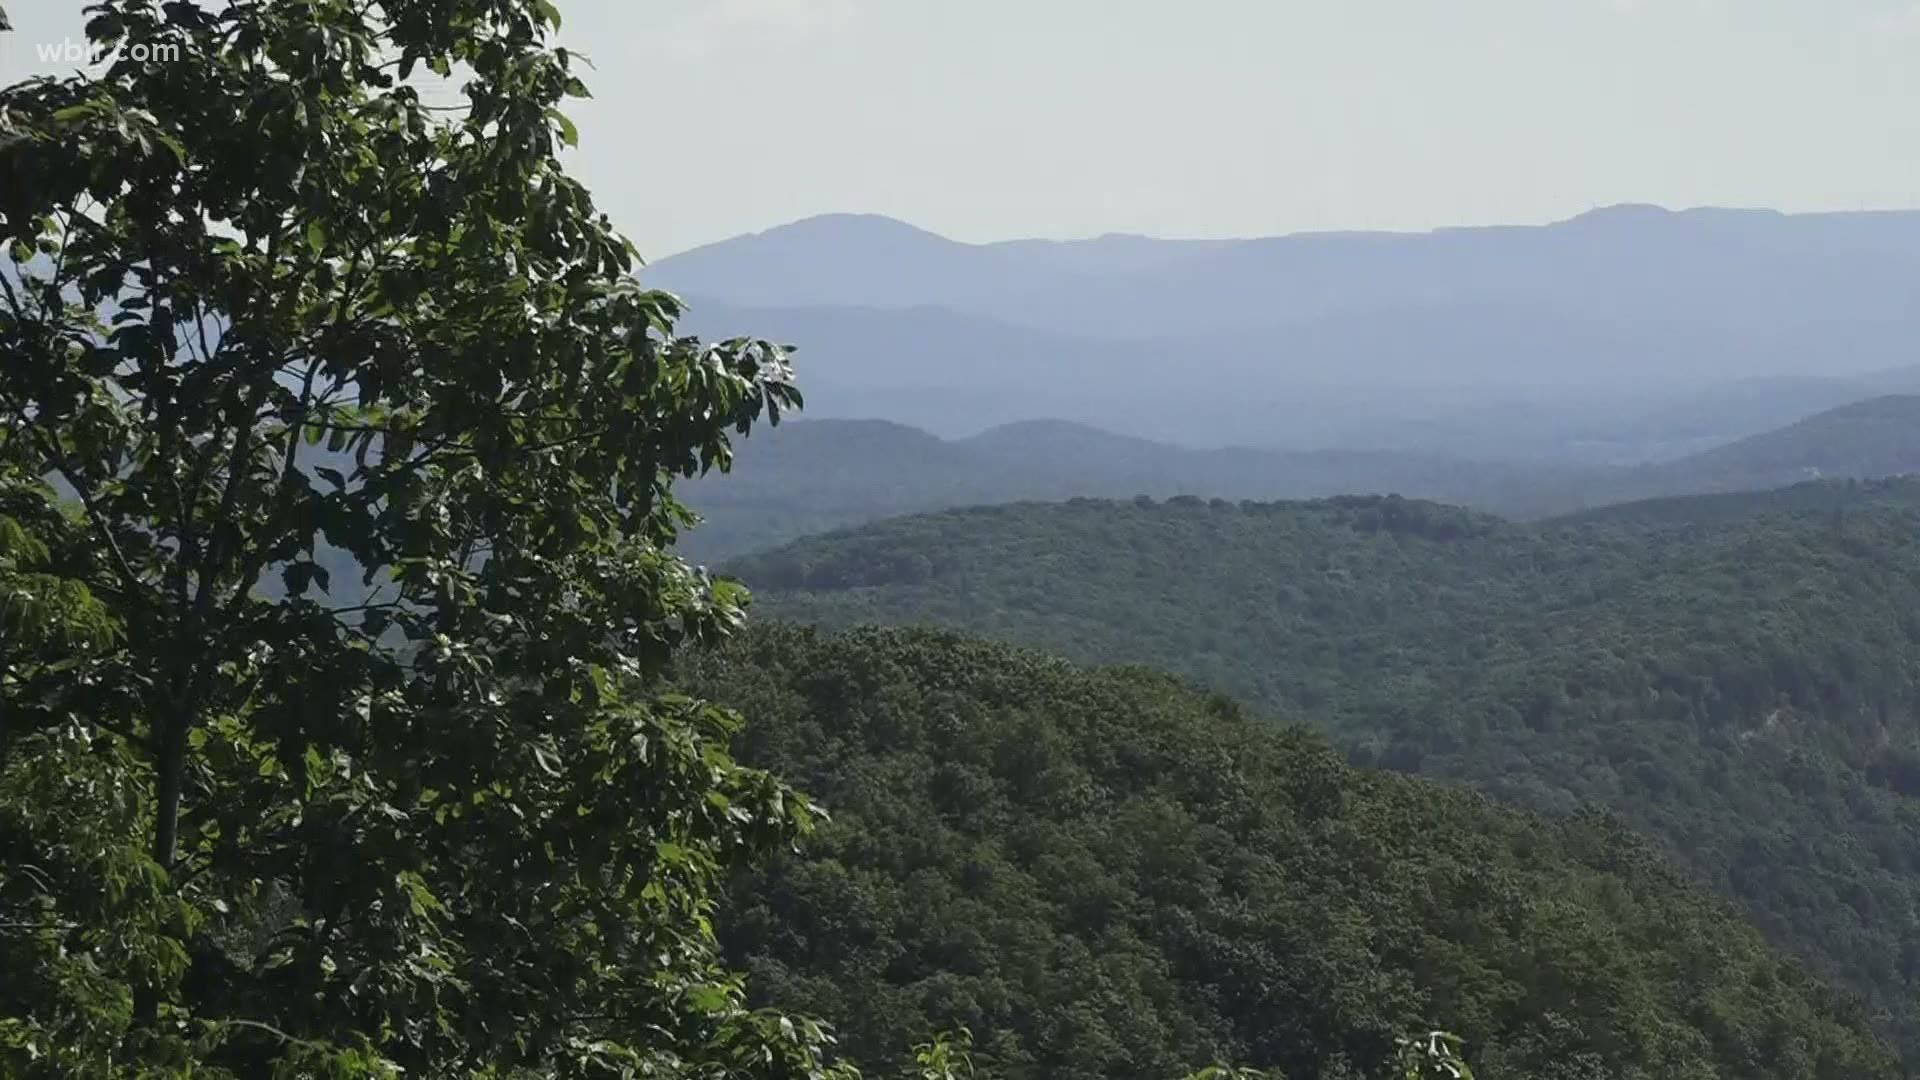 Shannon Smith has been enjoying the day here in the Crossville area. We sent her out to find the best hiking spots and scenic views in this part of the plateau.